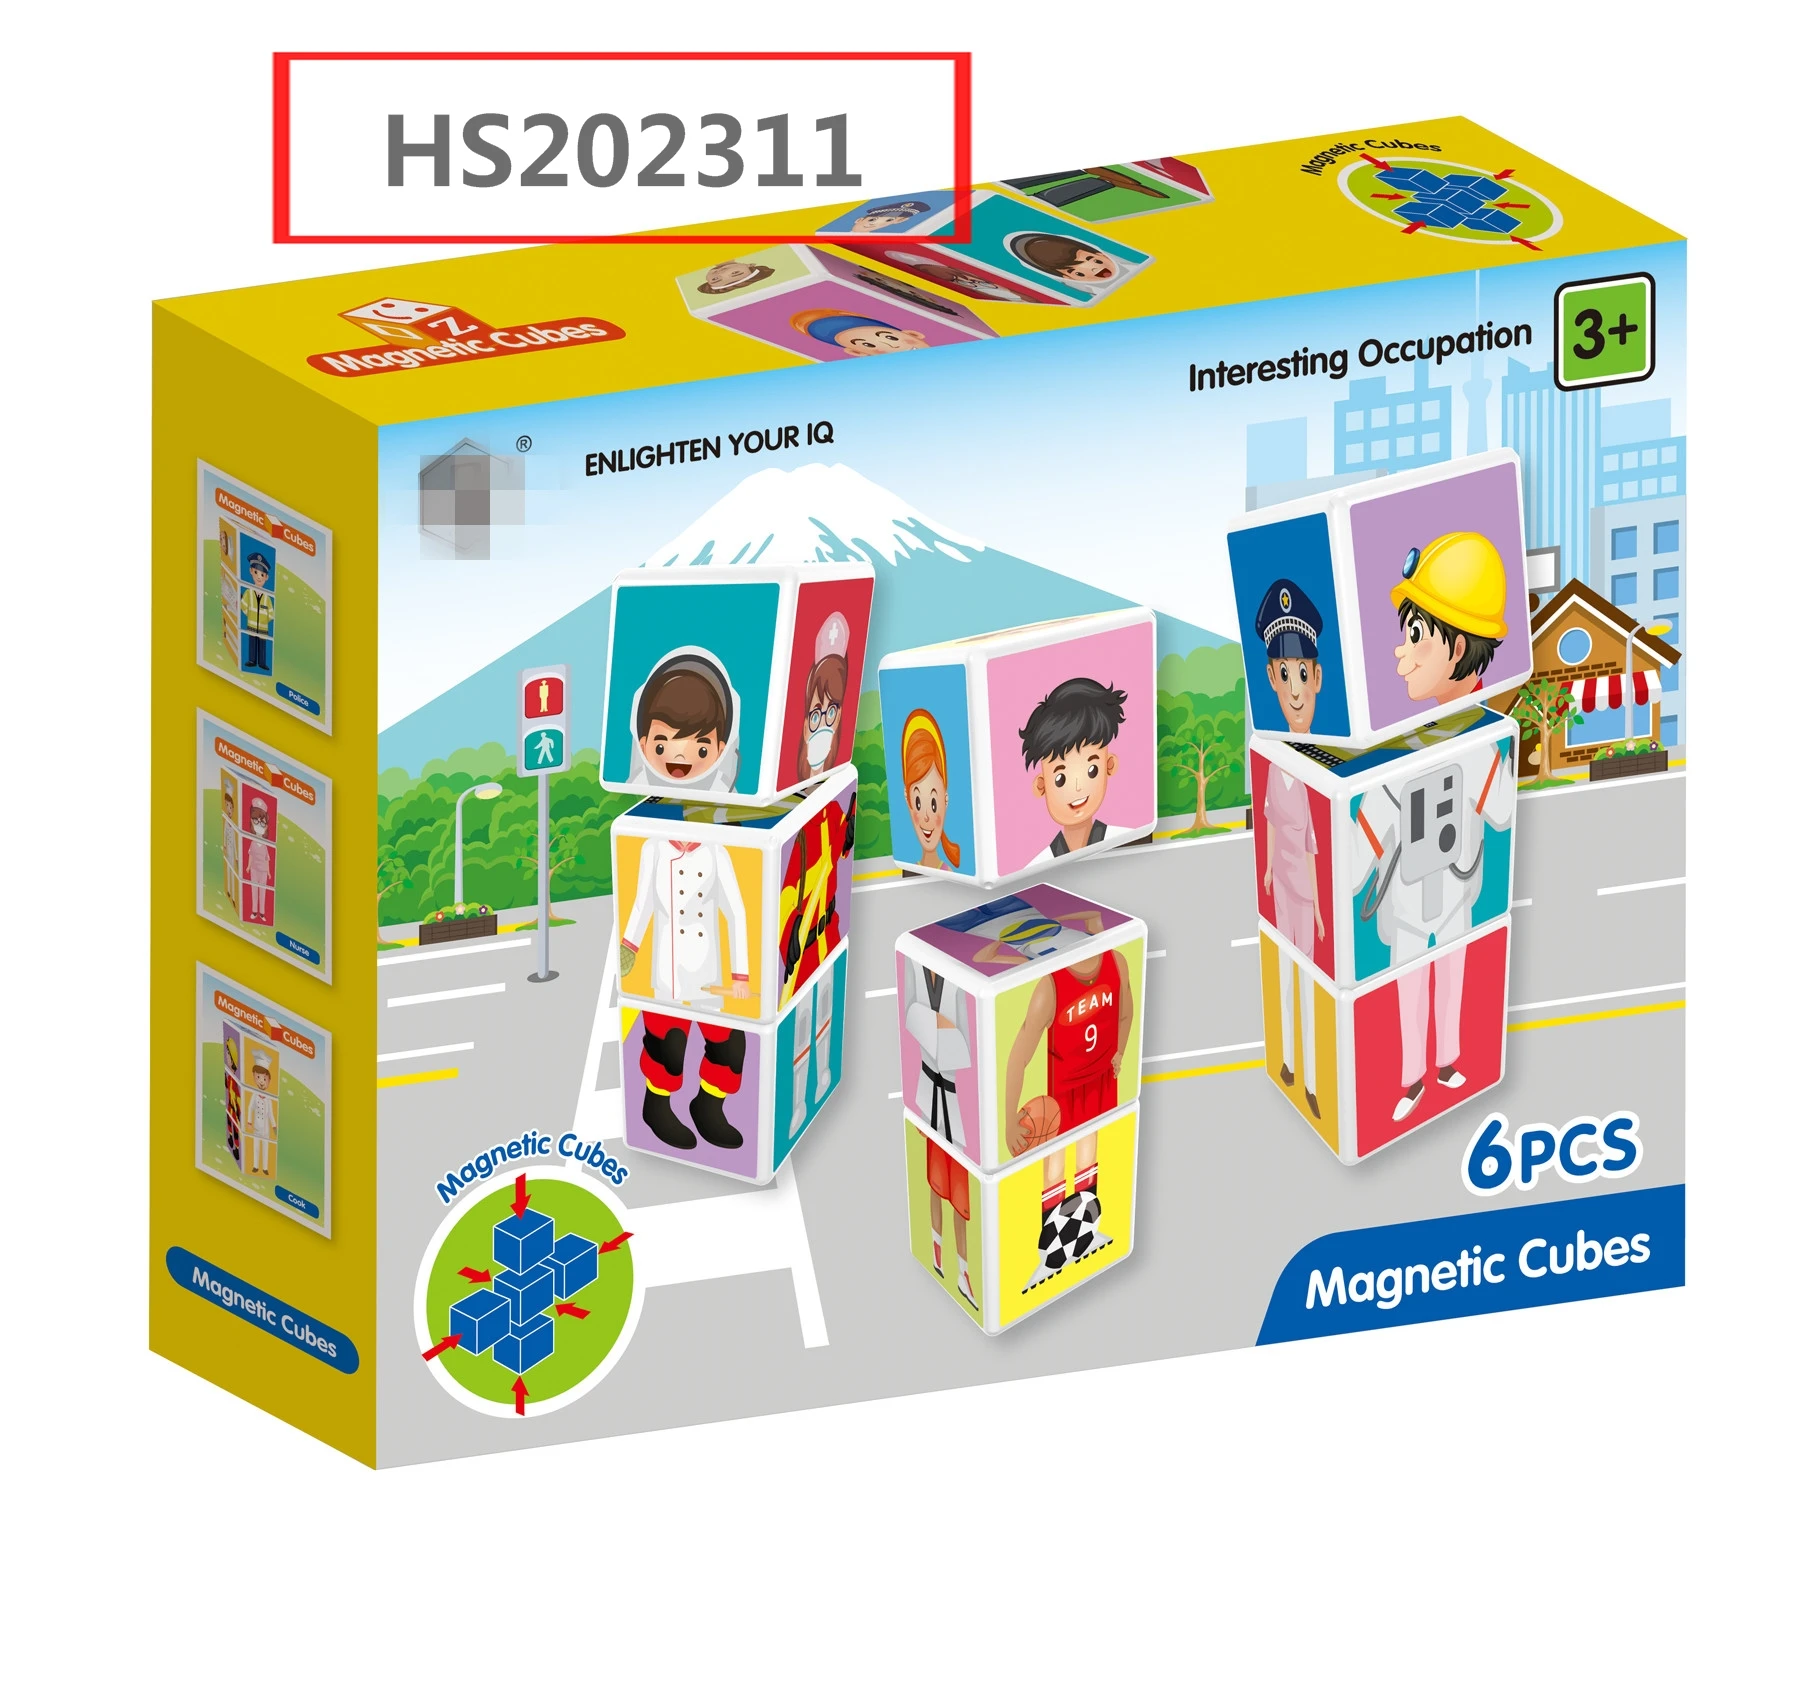 HS202311, Huwsin Toys, Magnetic magic cube,magnetic building block,6pcs, Educational toy